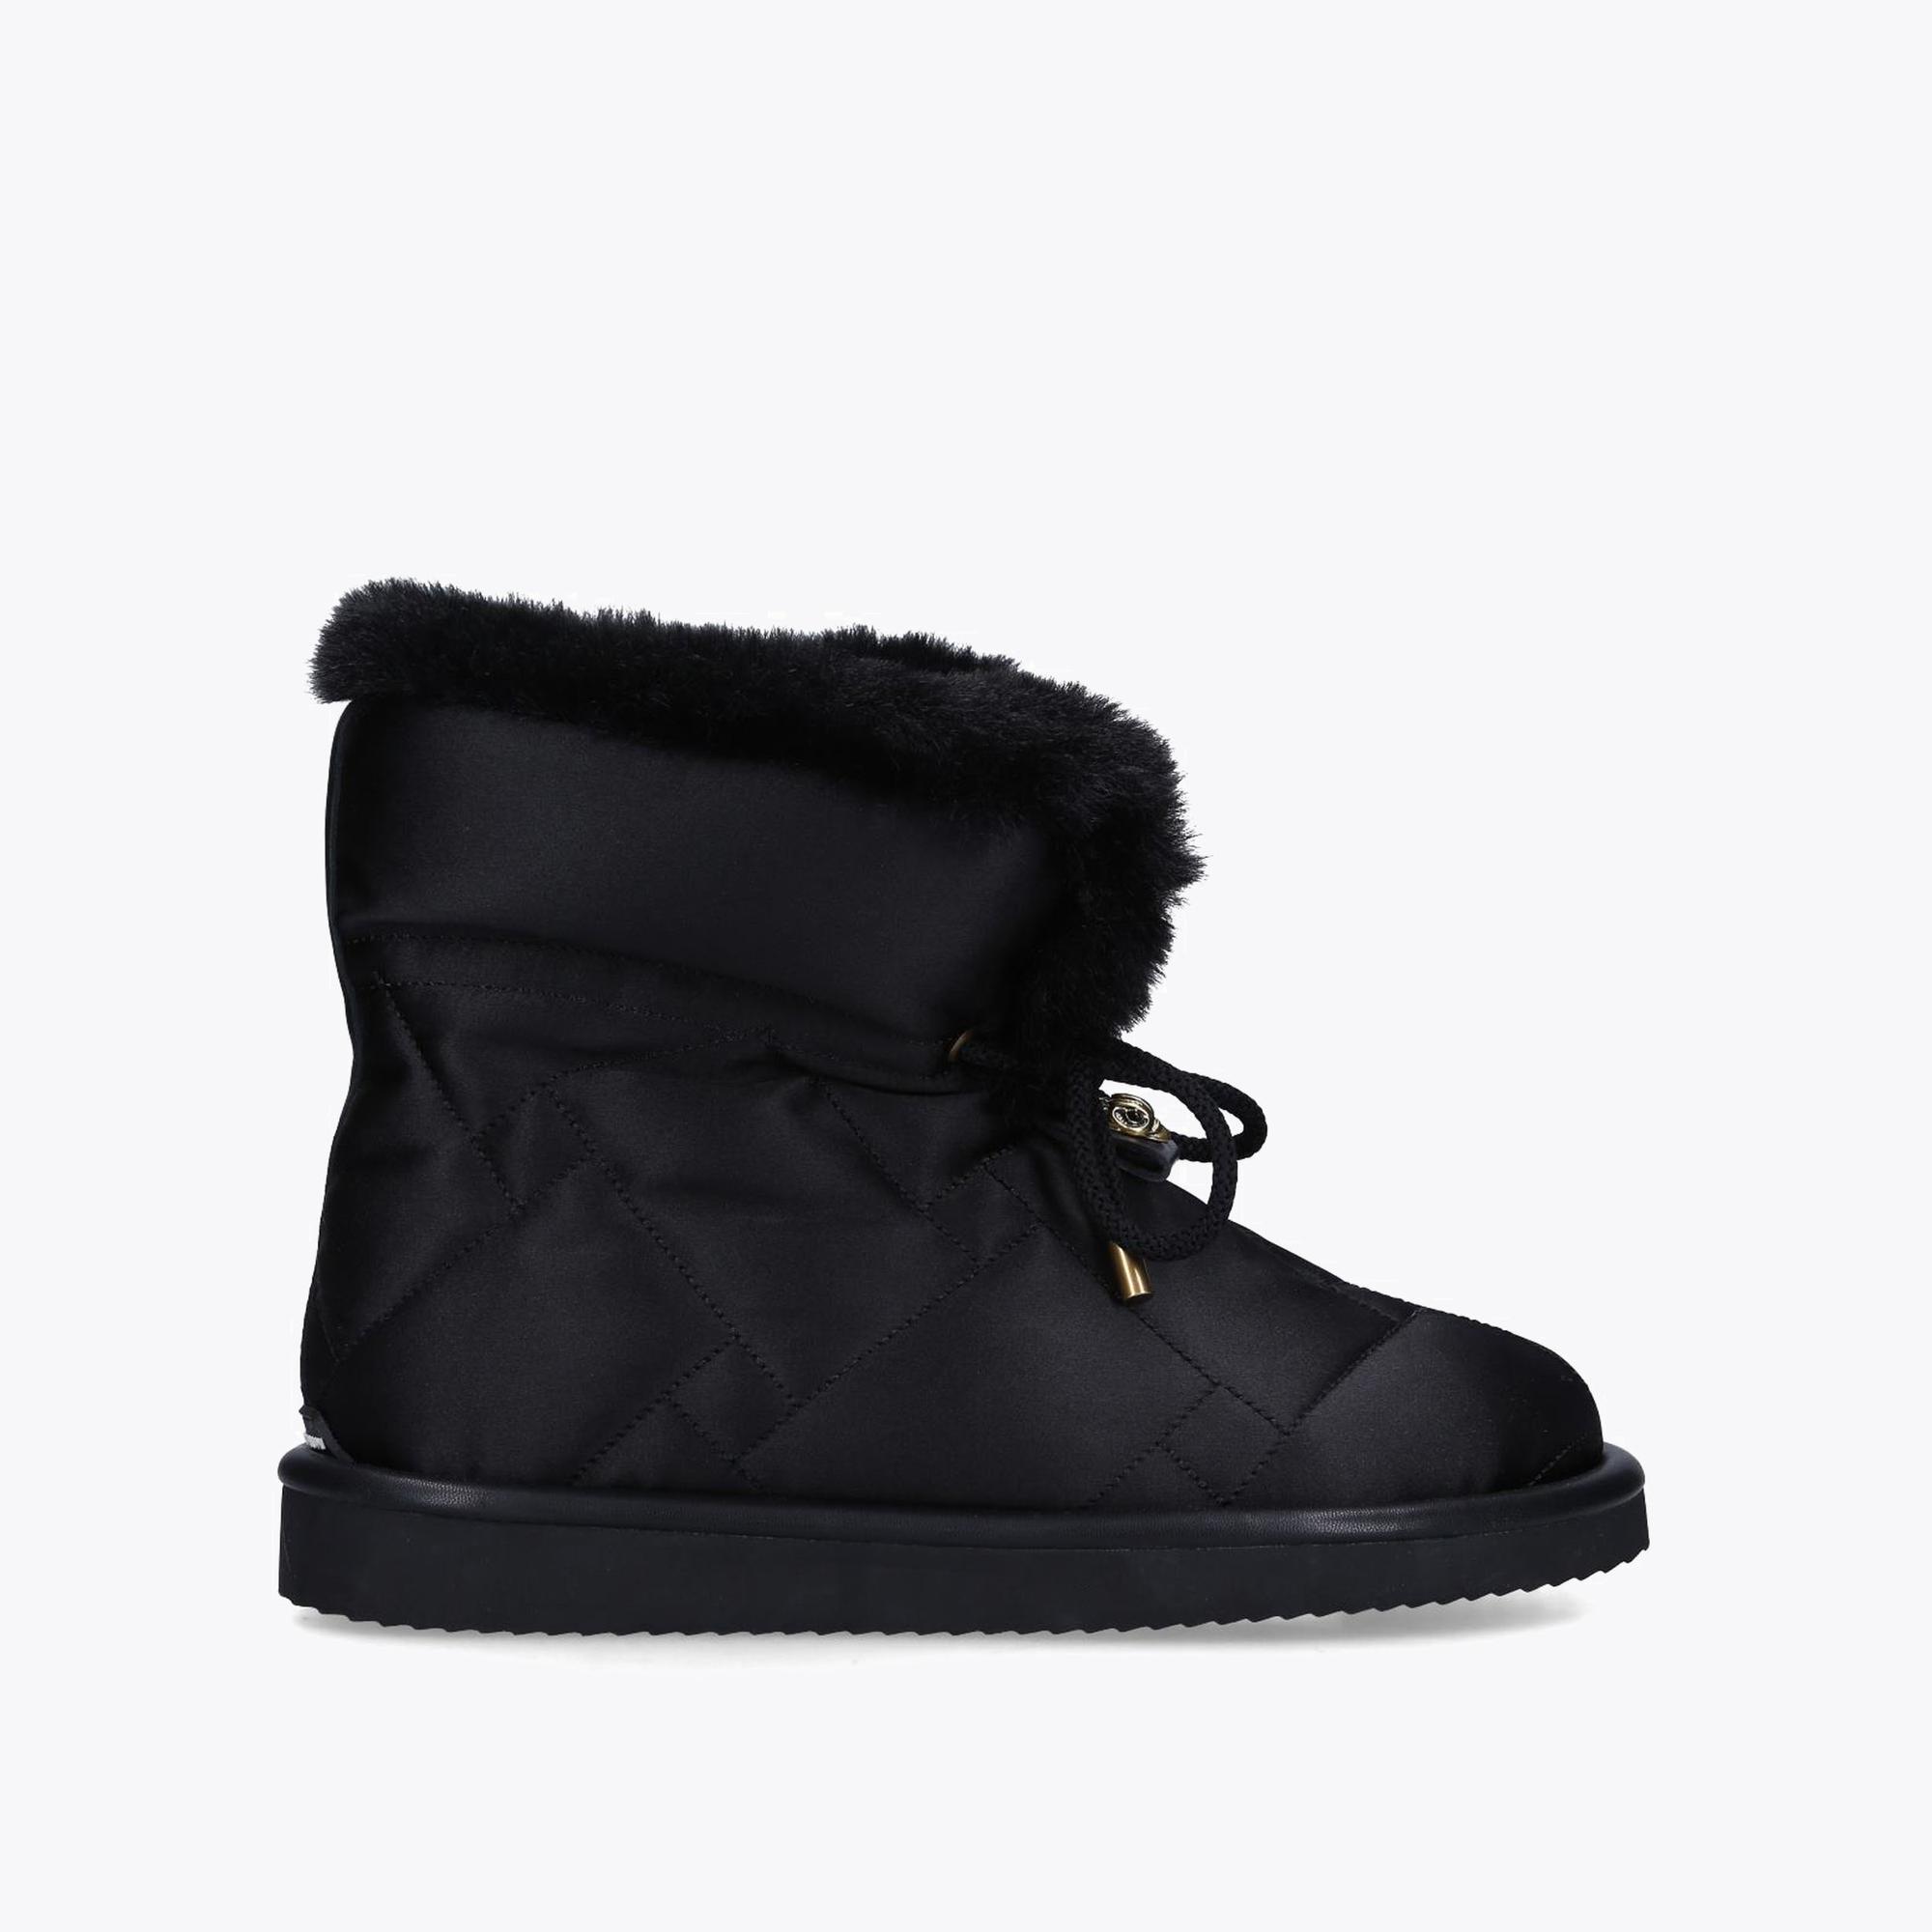 Louis Vuitton Puffy Wedge Lace Up Boots